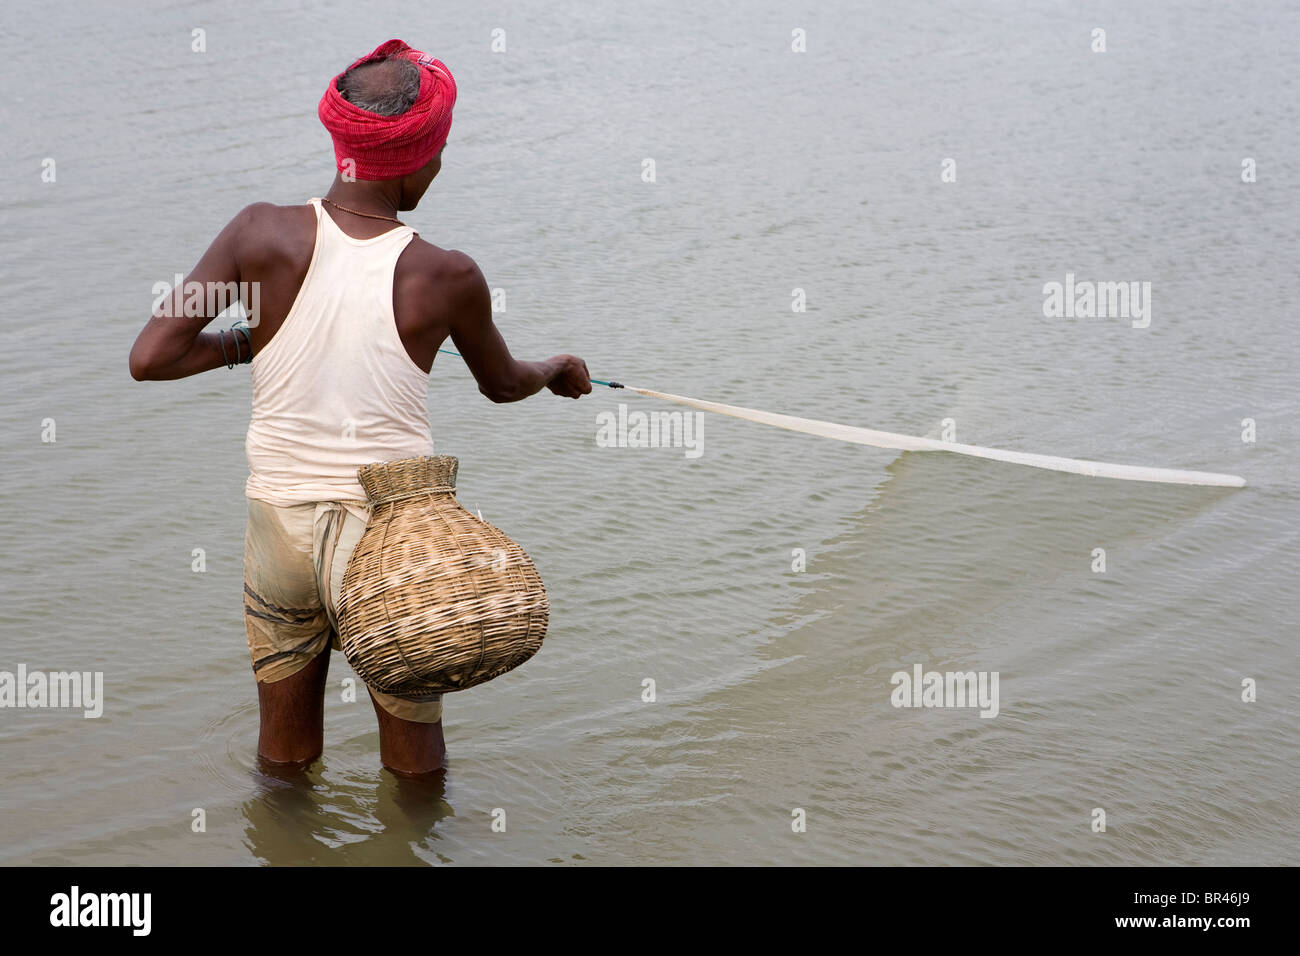 https://c8.alamy.com/comp/BR46J9/an-indian-fisherman-with-a-basket-is-fishing-by-net-in-the-sea-near-BR46J9.jpg